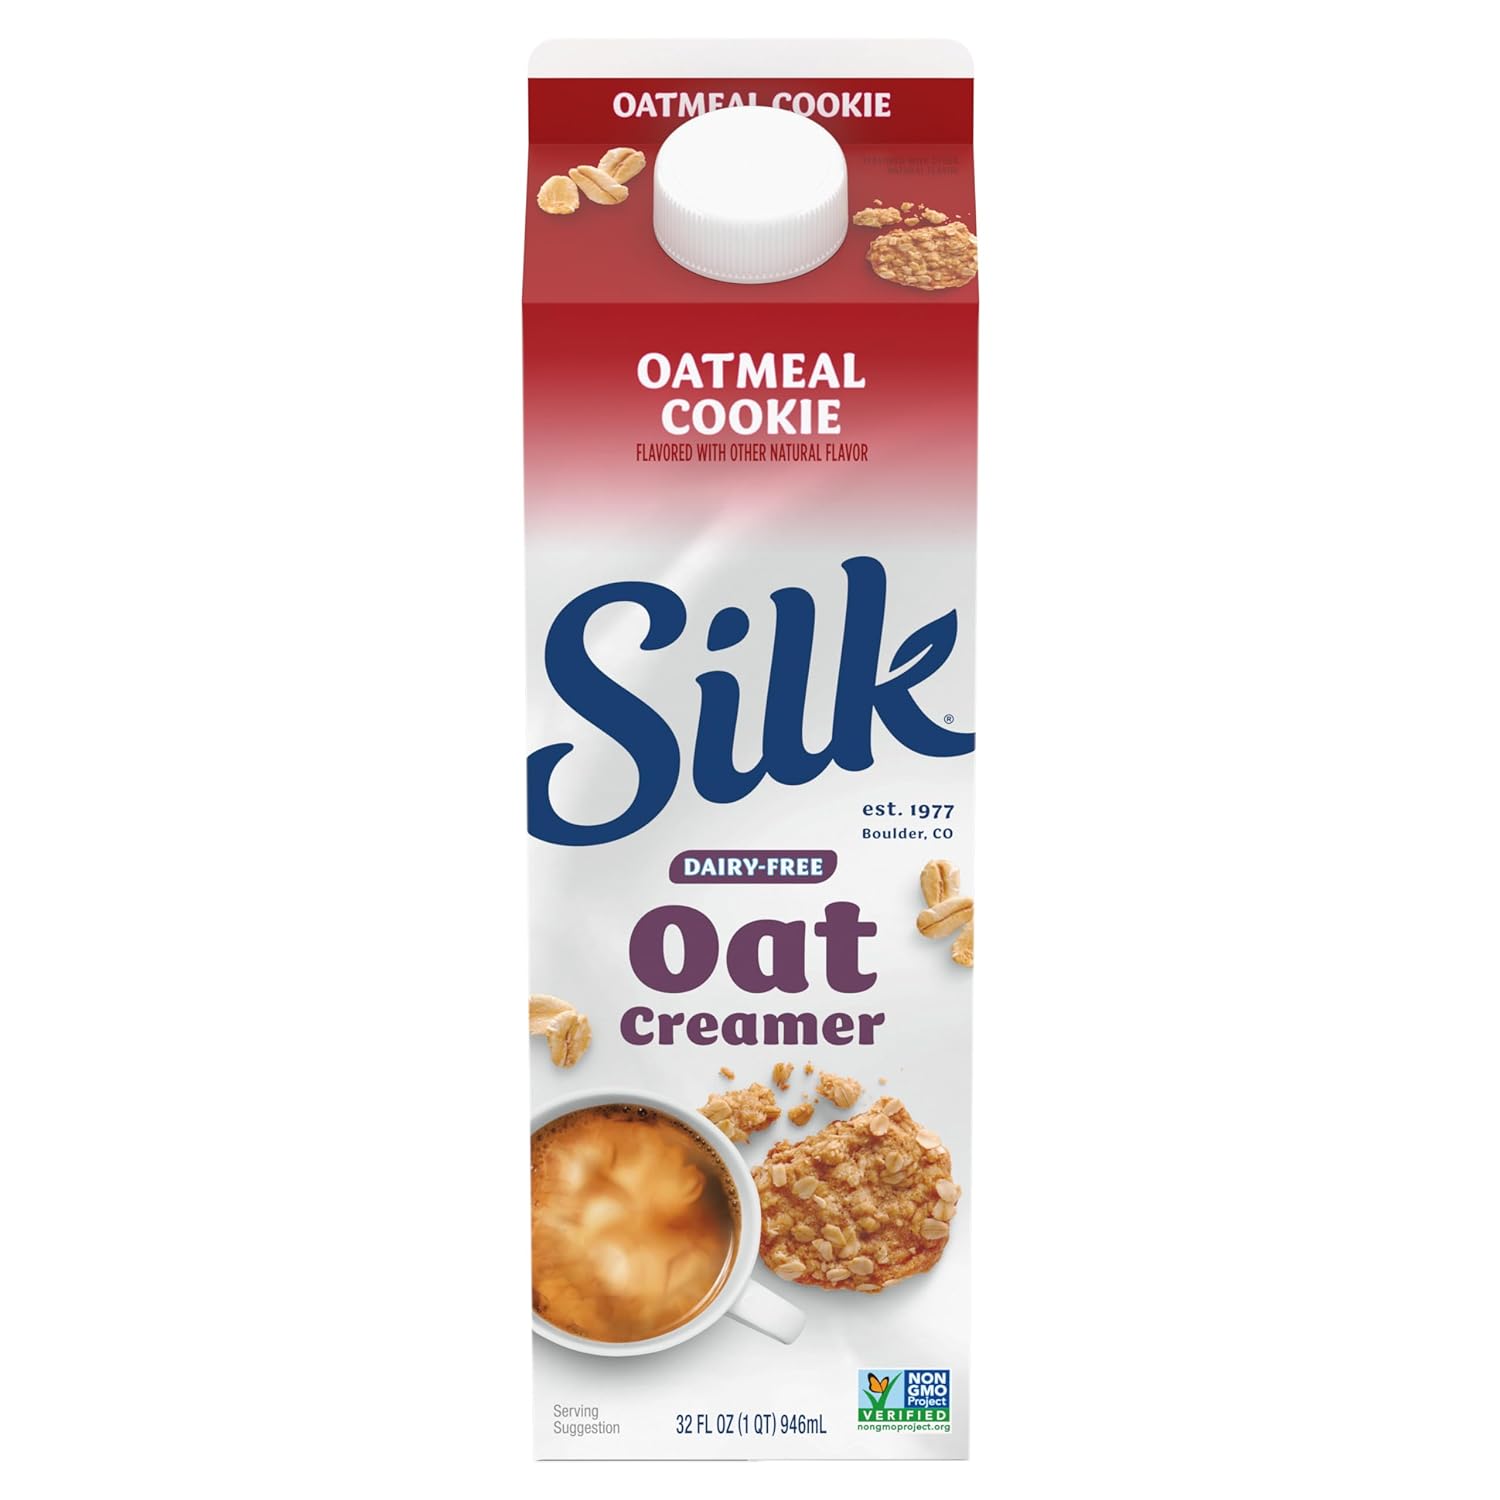 Silk Oat Creamer, Oatmeal Cookie, Smooth, Lusciously Creamy Dairy Free and Gluten Free Creamer From the No. 1 Brand of Plant Based Creamers, 32 FL OZ Carton